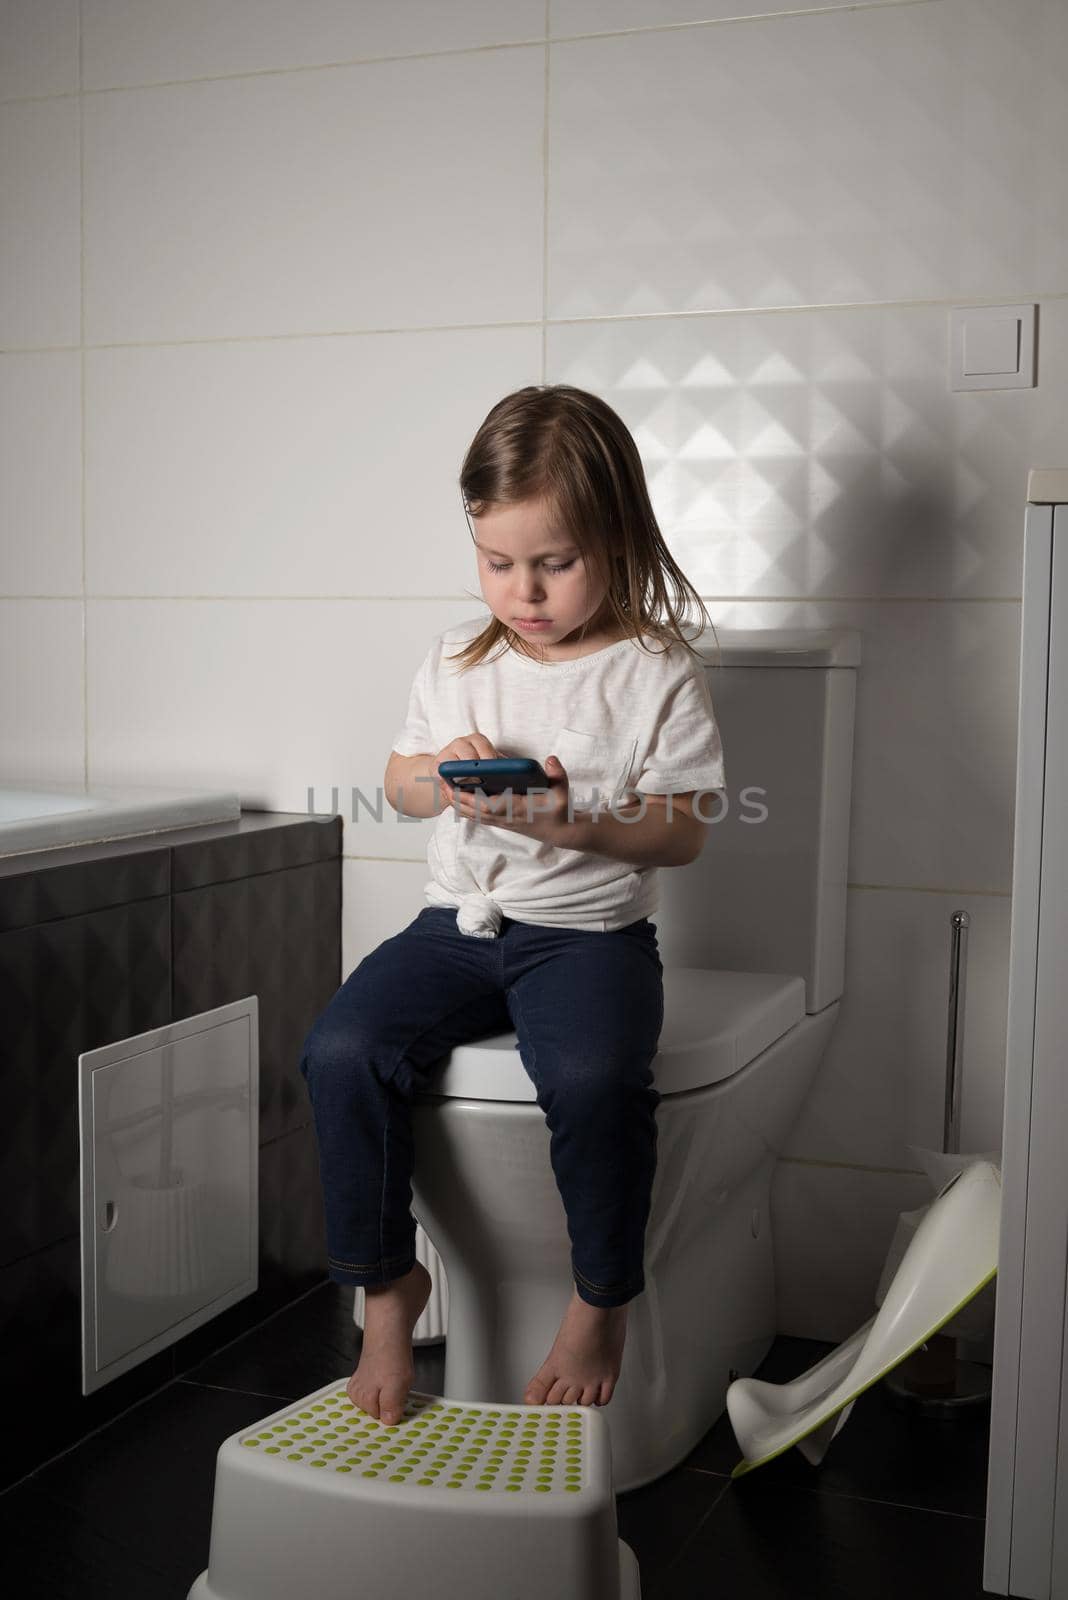 A girl dressed in a blue jeance and white t-shirt playing with a mobile phone in the bathroom by Ashtray25